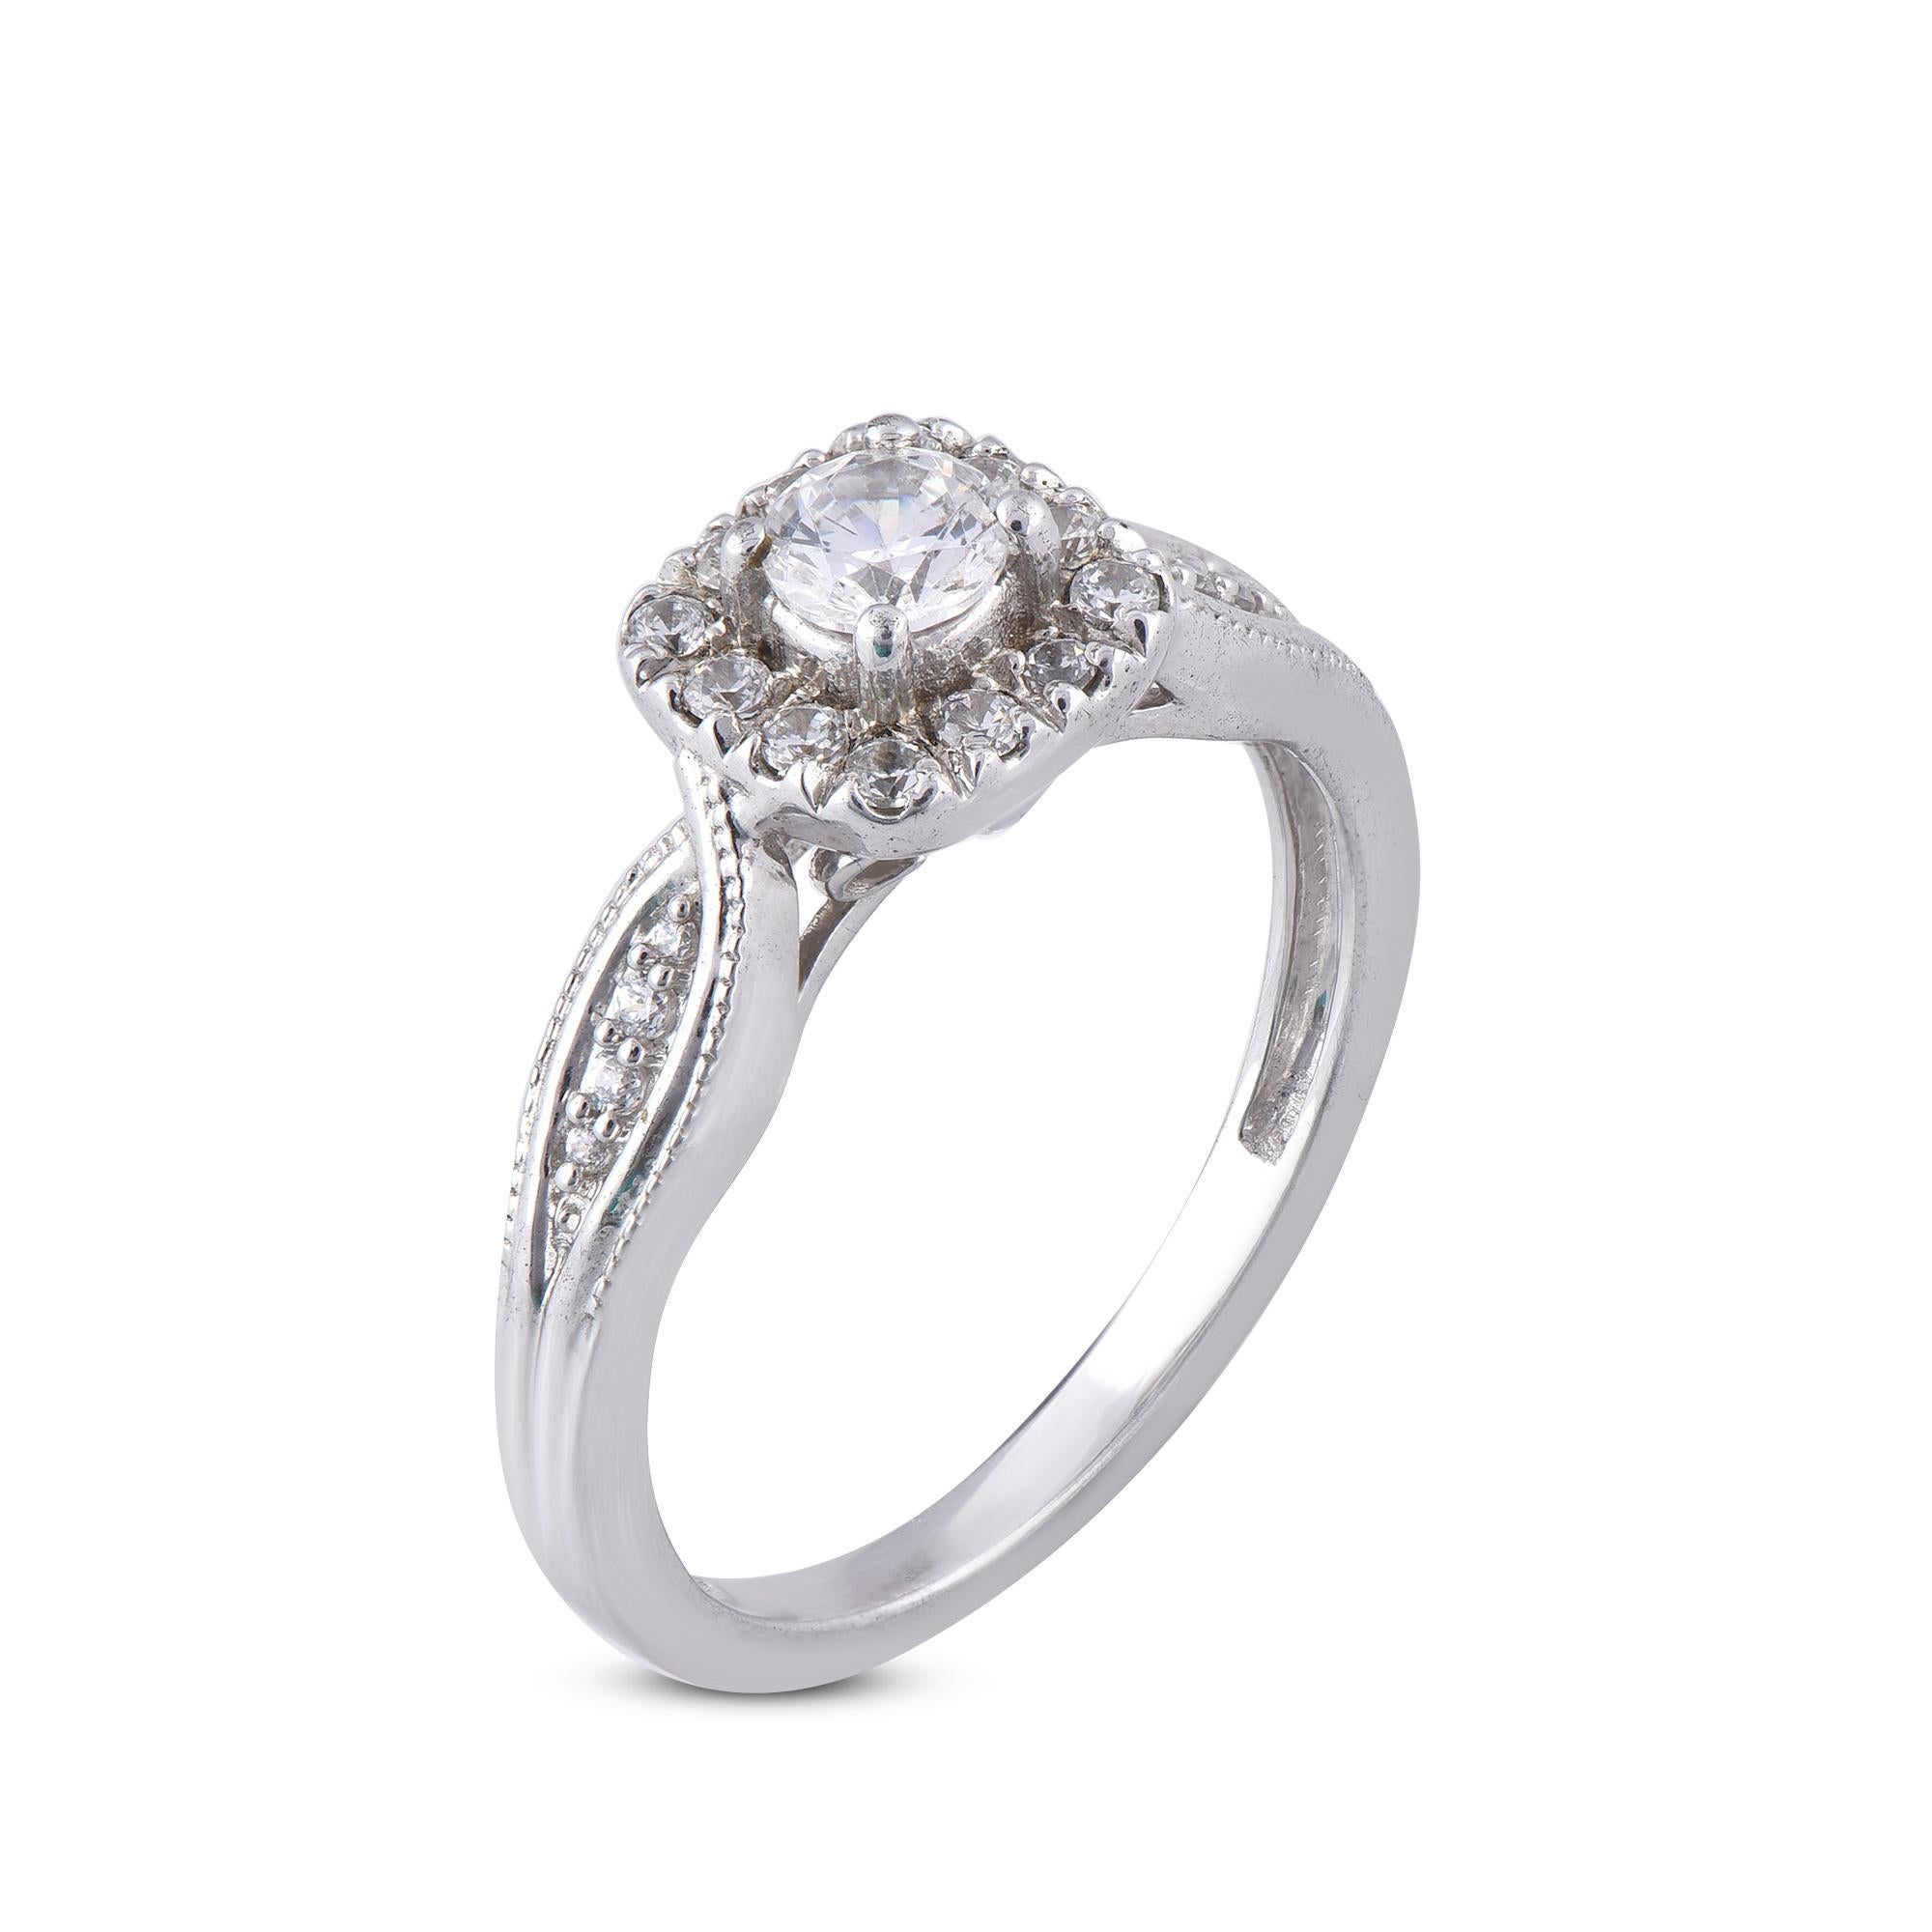 Stunning and classic, this diamond ring is beautifully crafted in 18 karat White gold. The engagement ring features 0.27 ct of centre stone and 0.23 ct diamond frame and twisted shank lined sparkling white diamonds set in secured prong settings. The